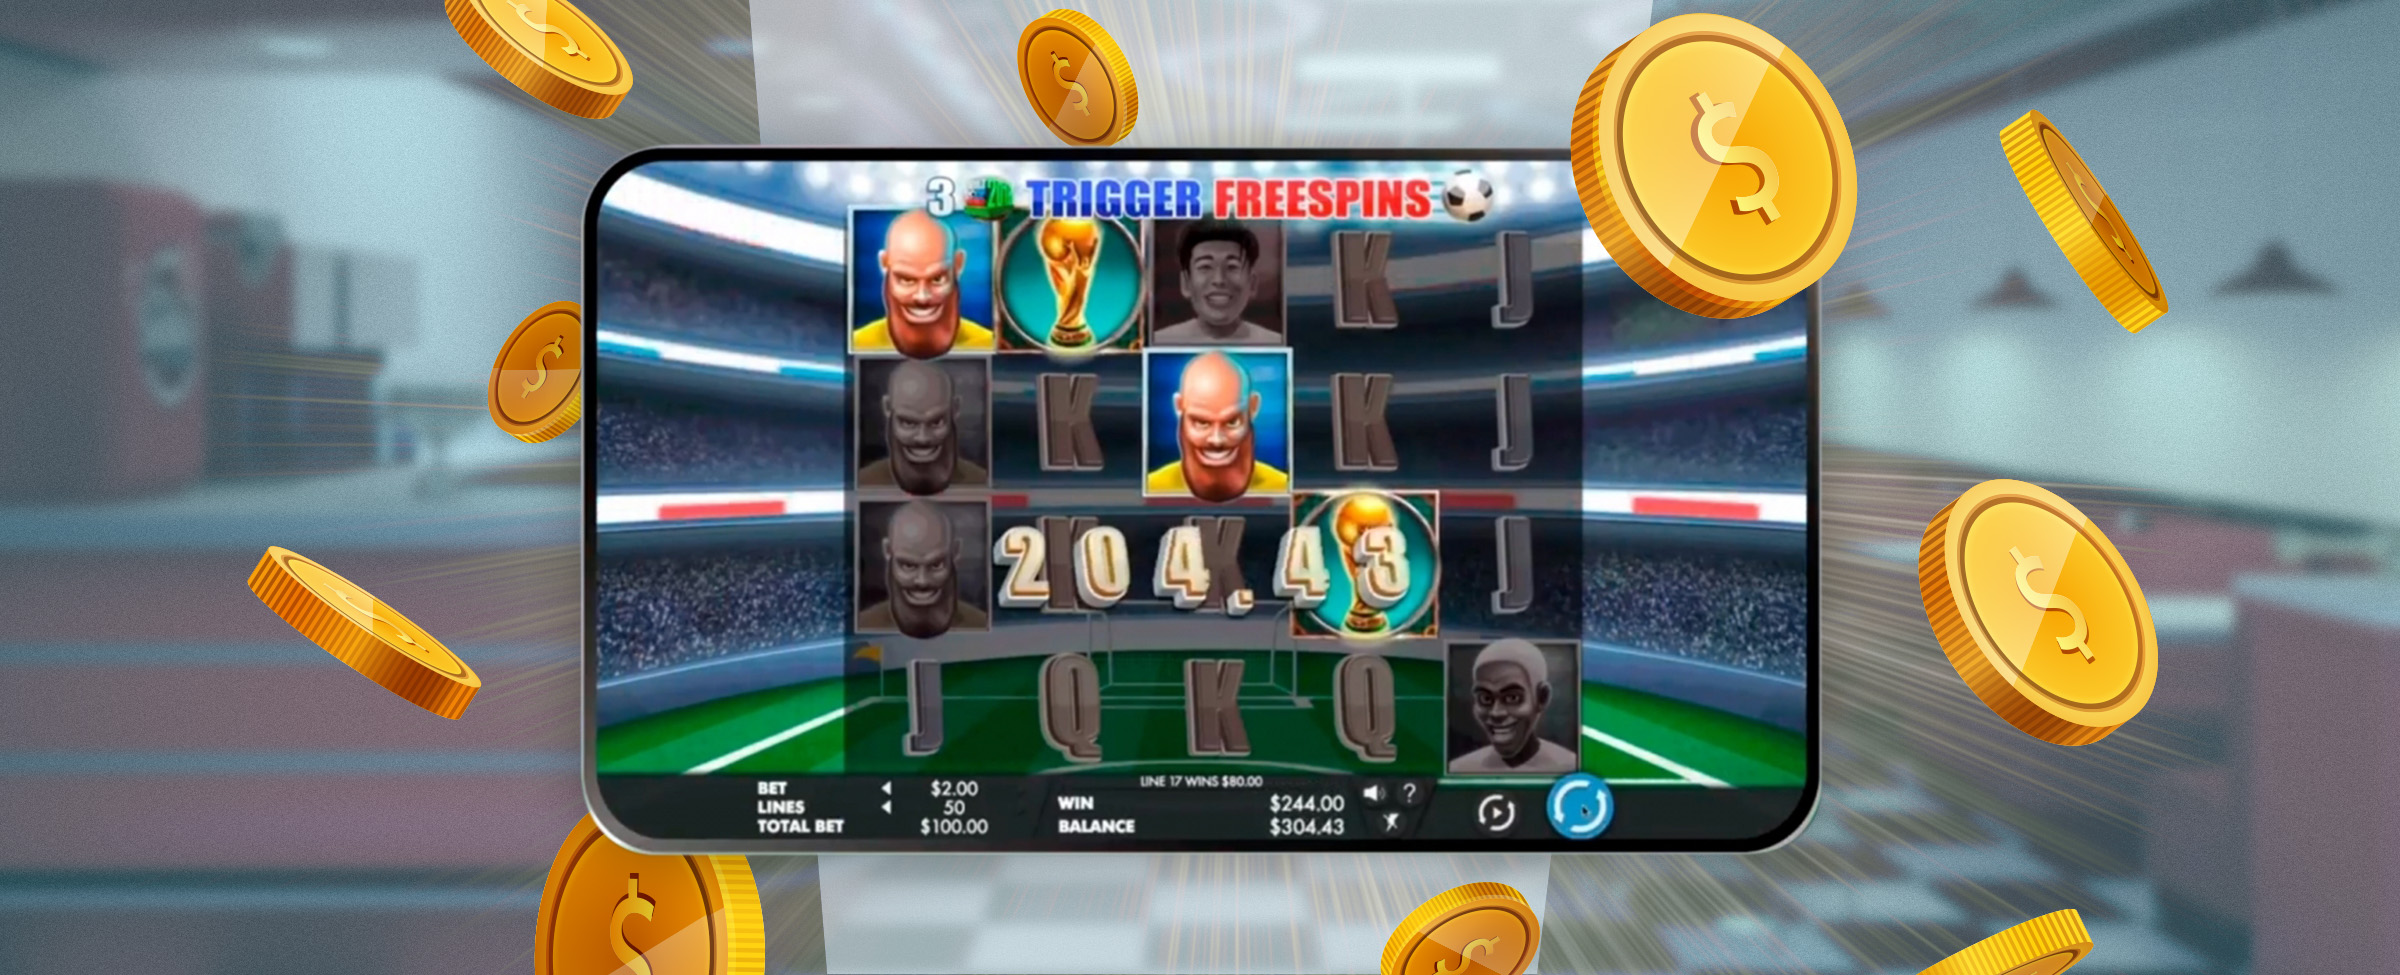 A mobile phone takes center screen, showing a screenshot of a Cafe Casino slot game called World Cup Football, set against a blurred-out 50s-style American diner, with gold coins floating around it.